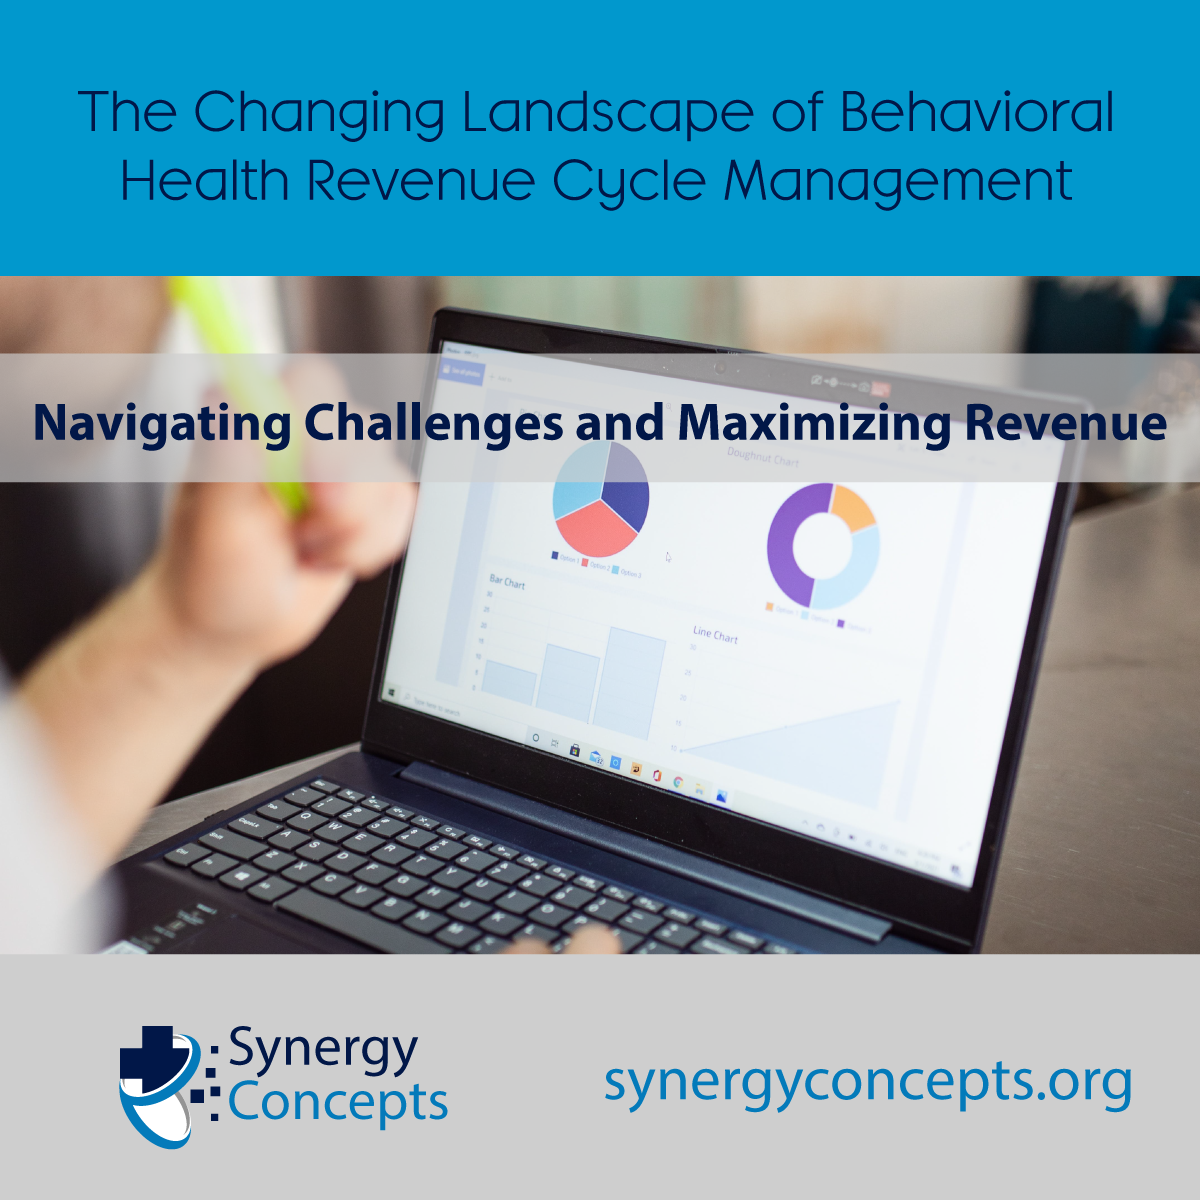 The Changing Landscape of Behavioral Health Revenue Cycle Management: Navigating Challenges and Maximizing Revenue